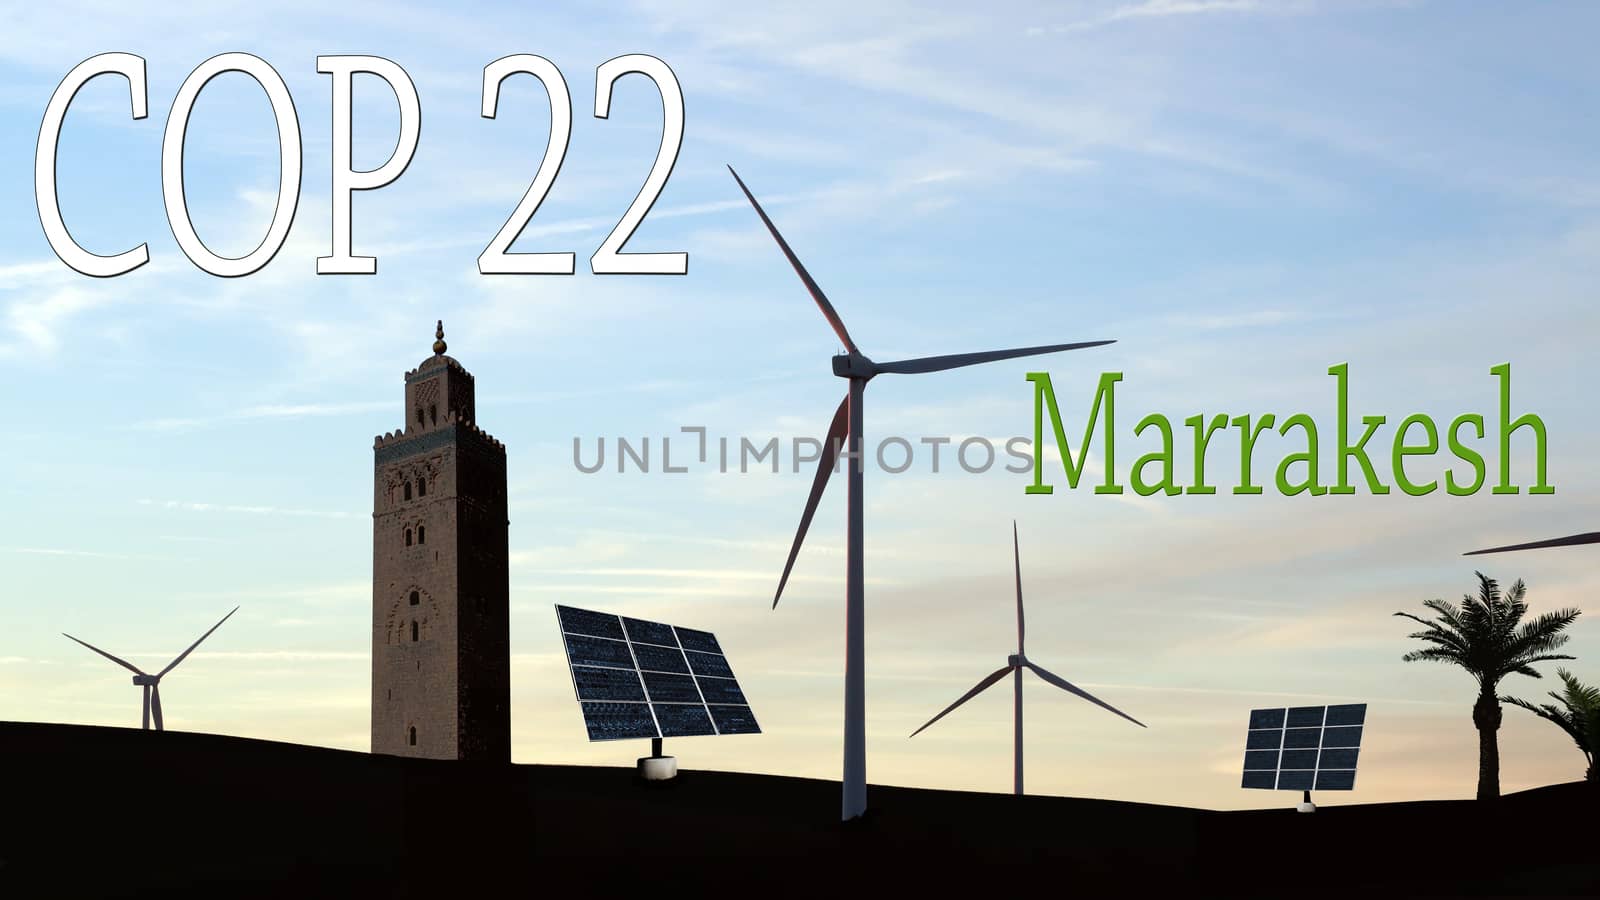 COP 22 in Marrakesh, Morocco - Wind Turbines and Solar Panels in a Moroccan Landscape